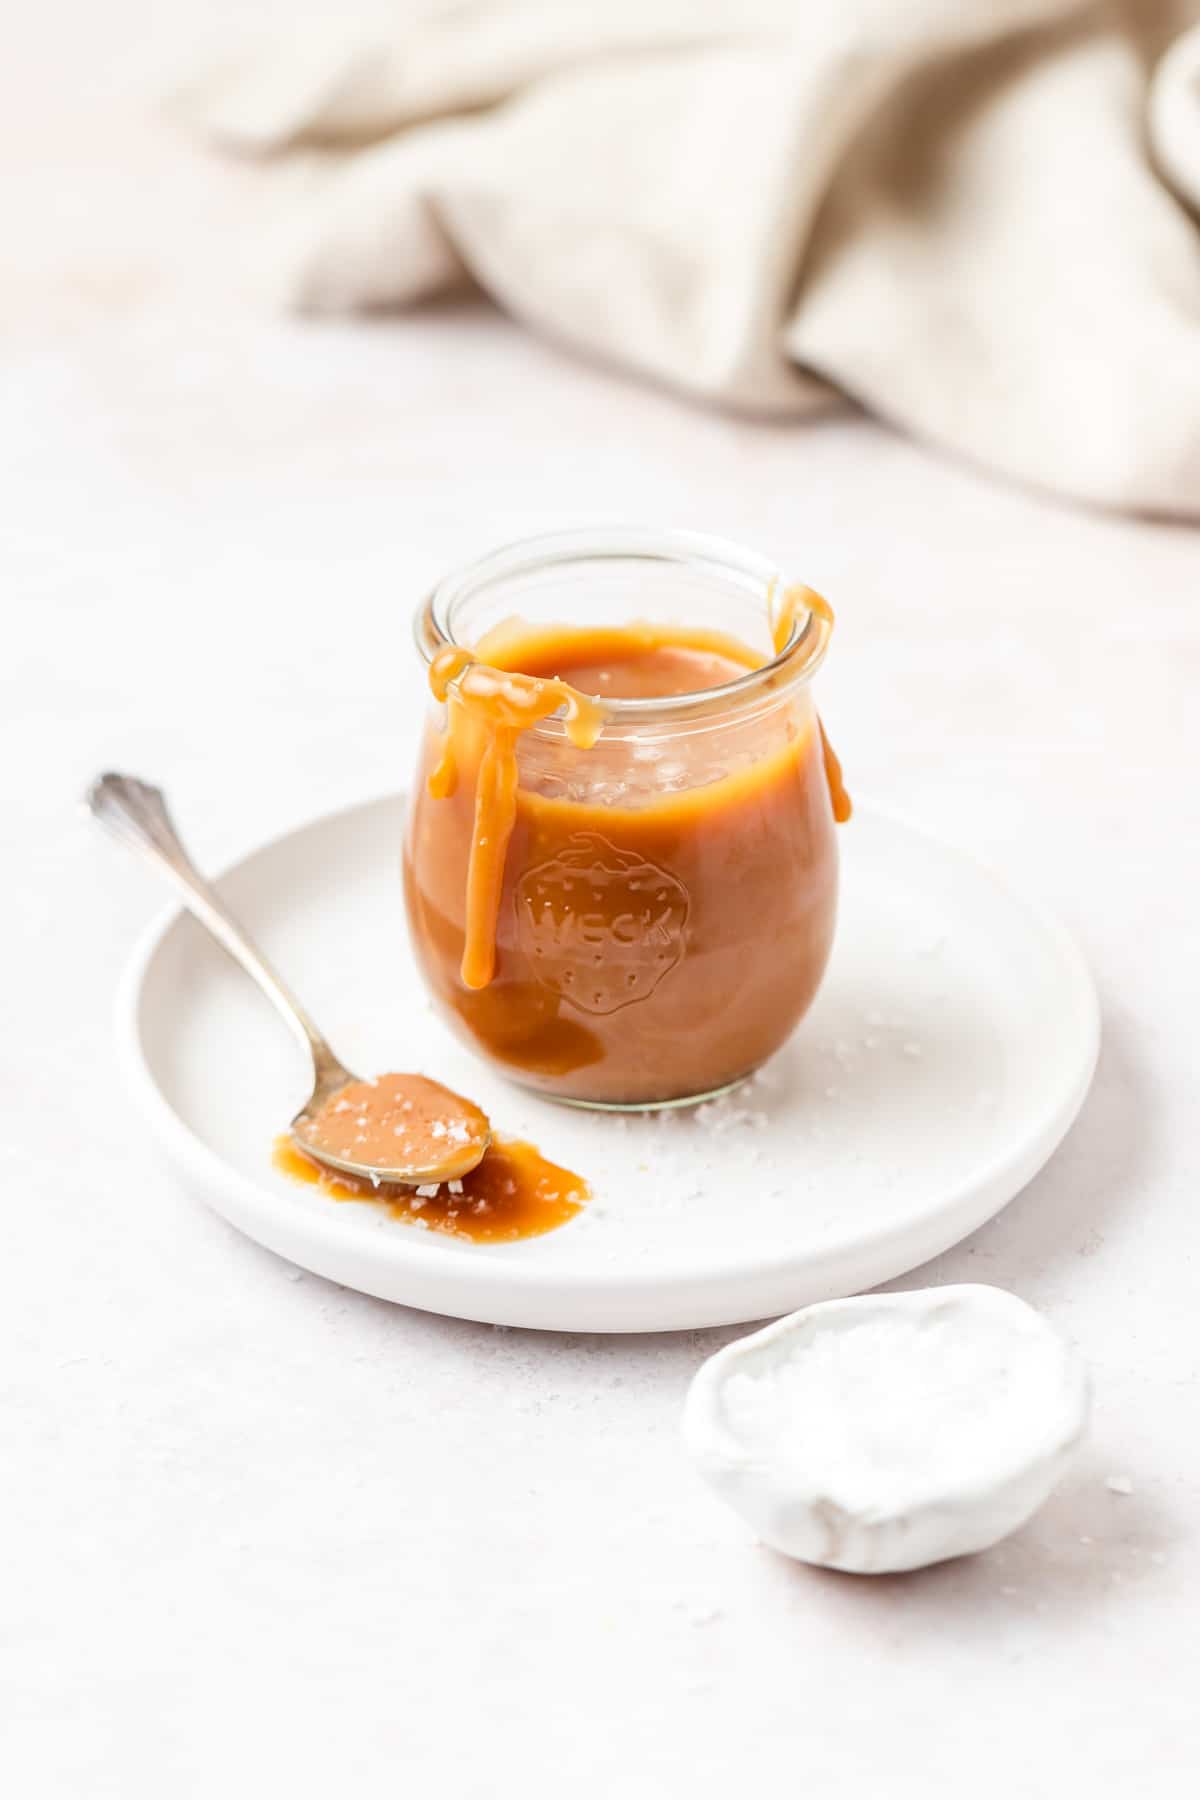 homemade salted caramel in small glass jar.